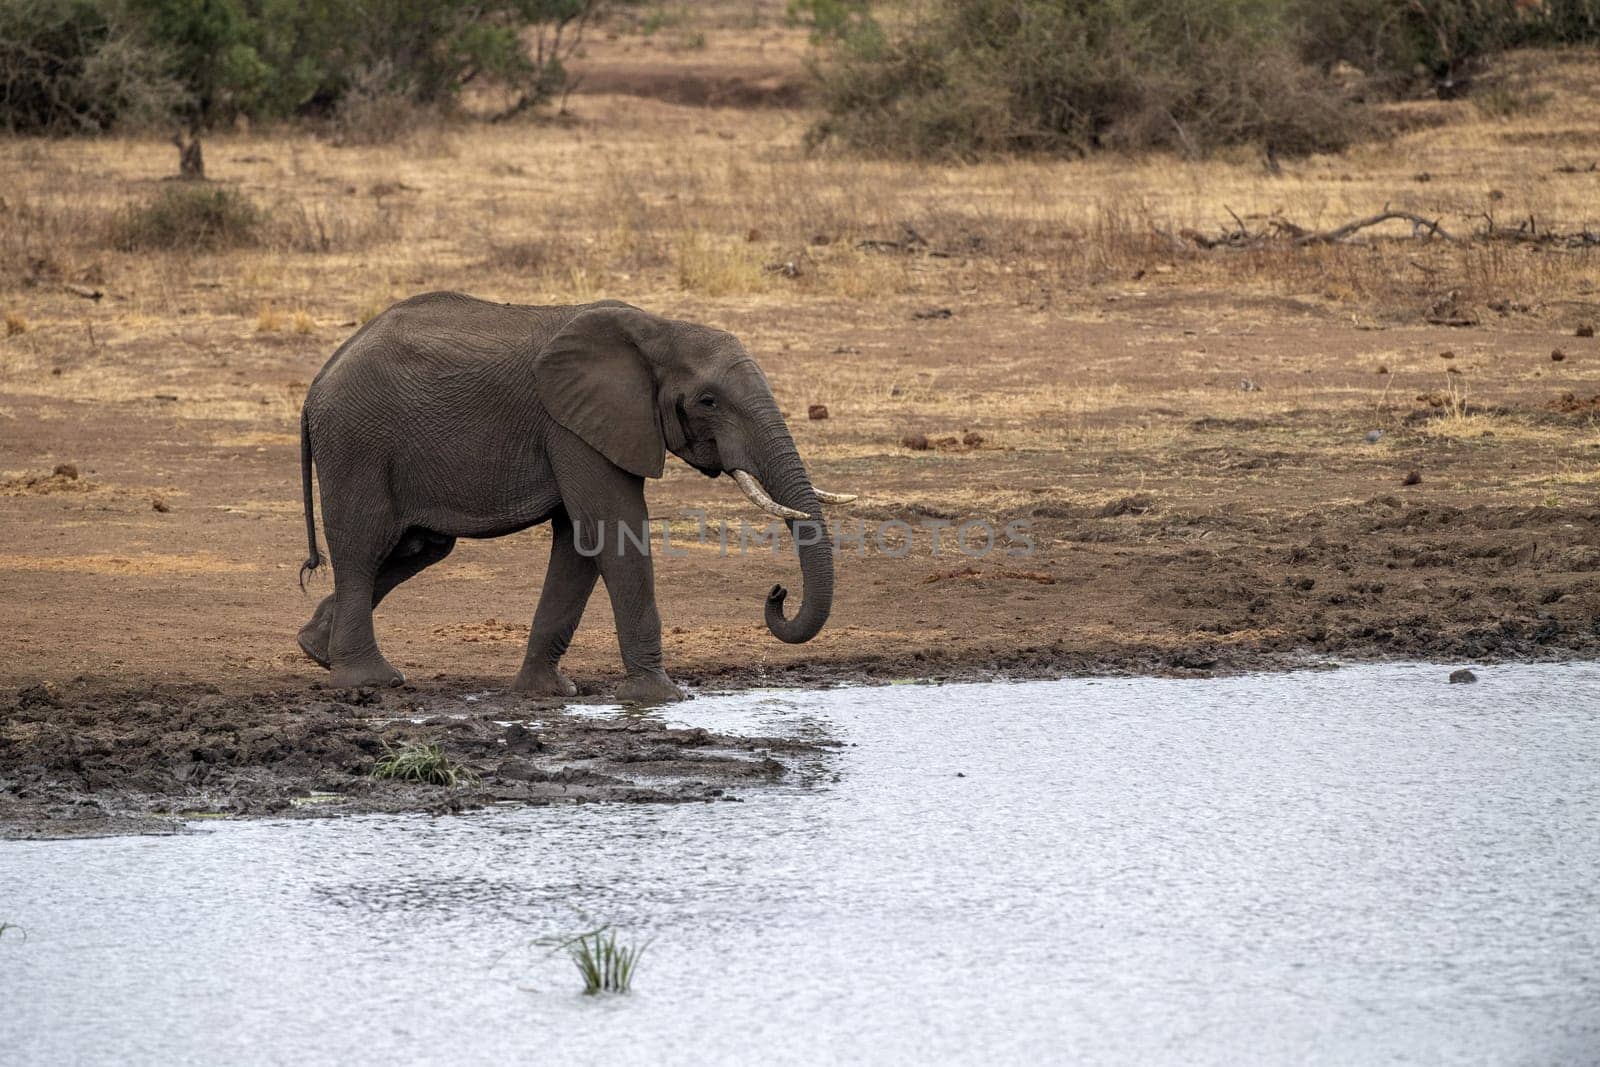 African elephant in the Kruger National Park, South Africa AT THE POND by AndreaIzzotti